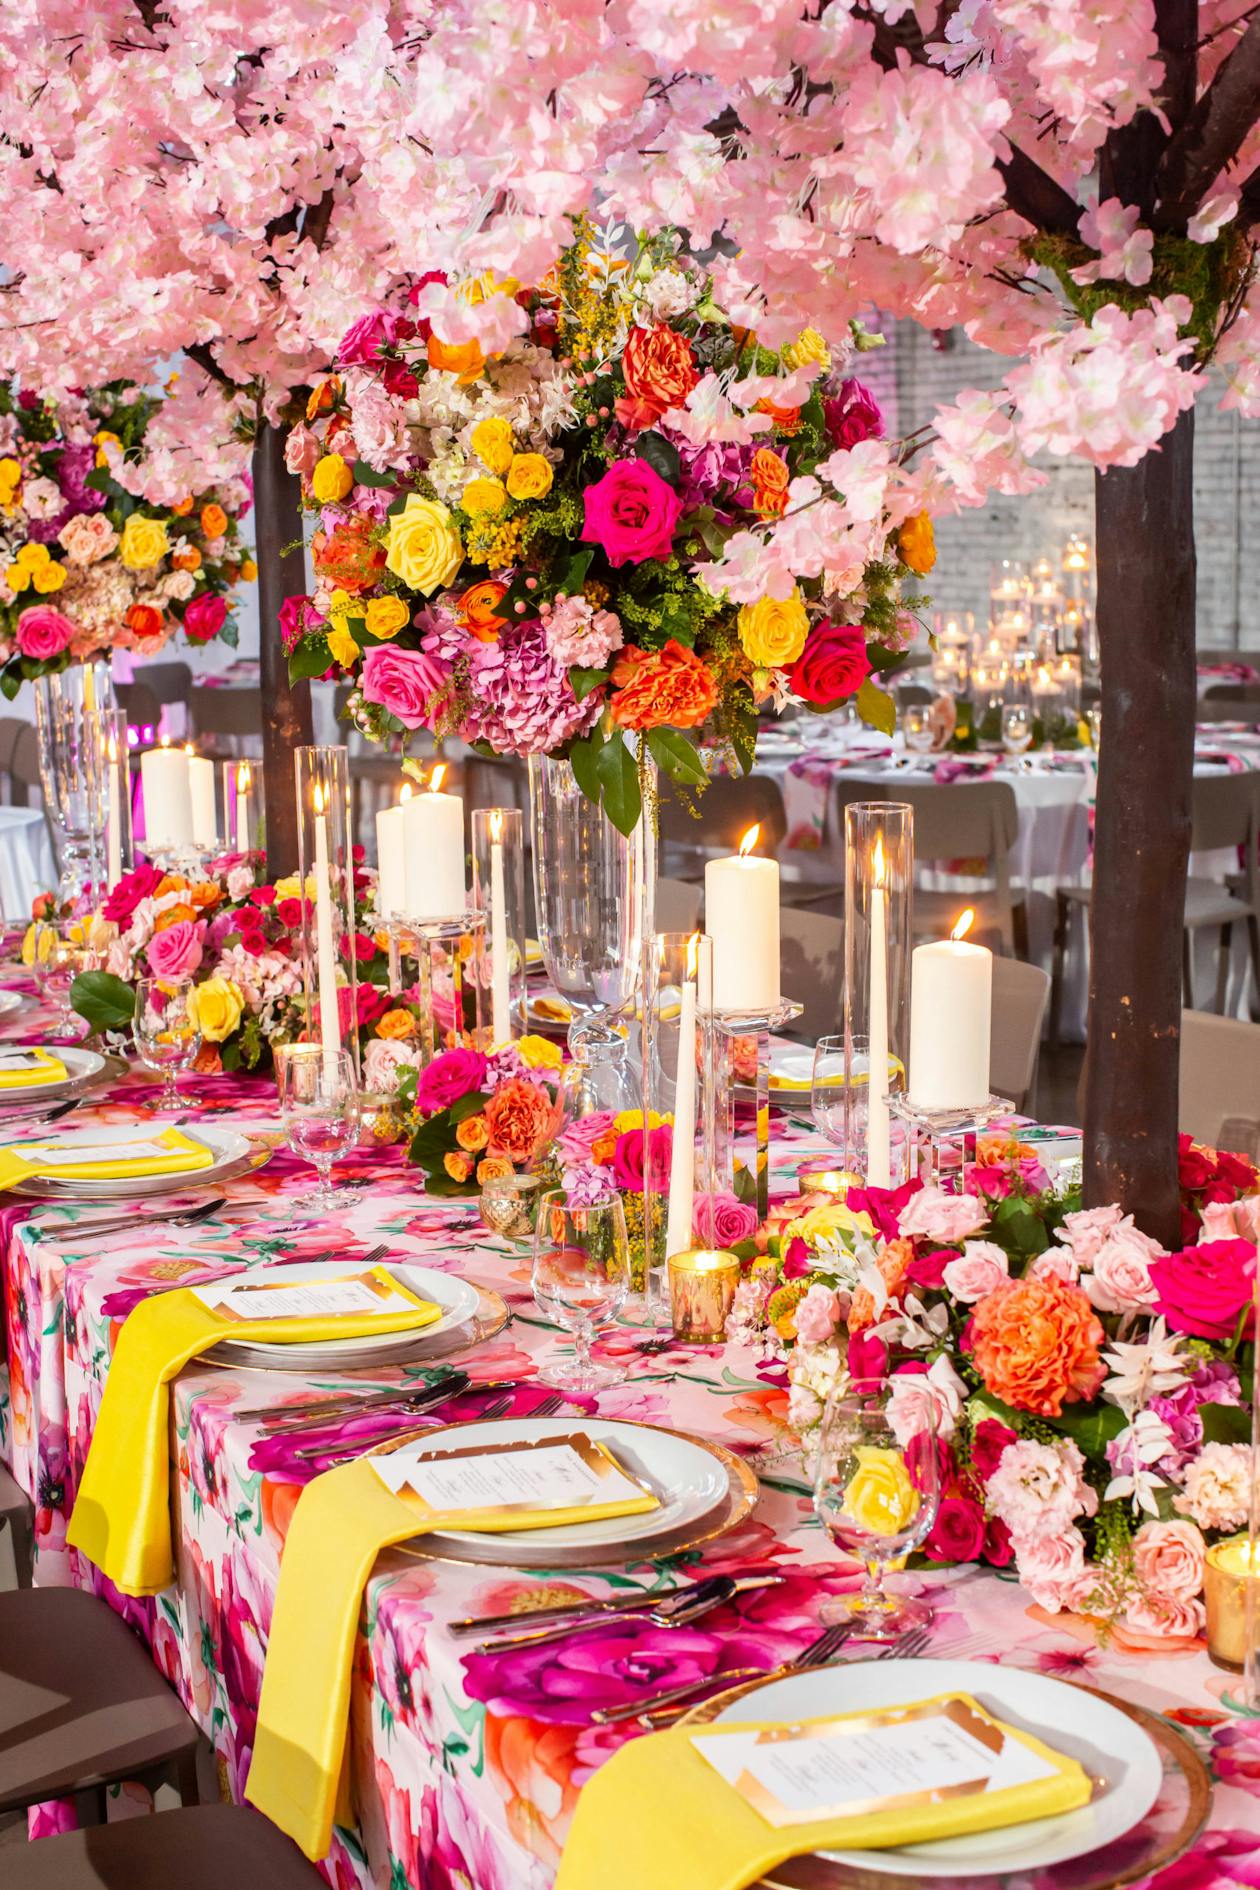 Colorful Wedding With Pink and Orange Floral Centerpieces on Table | PartySlate